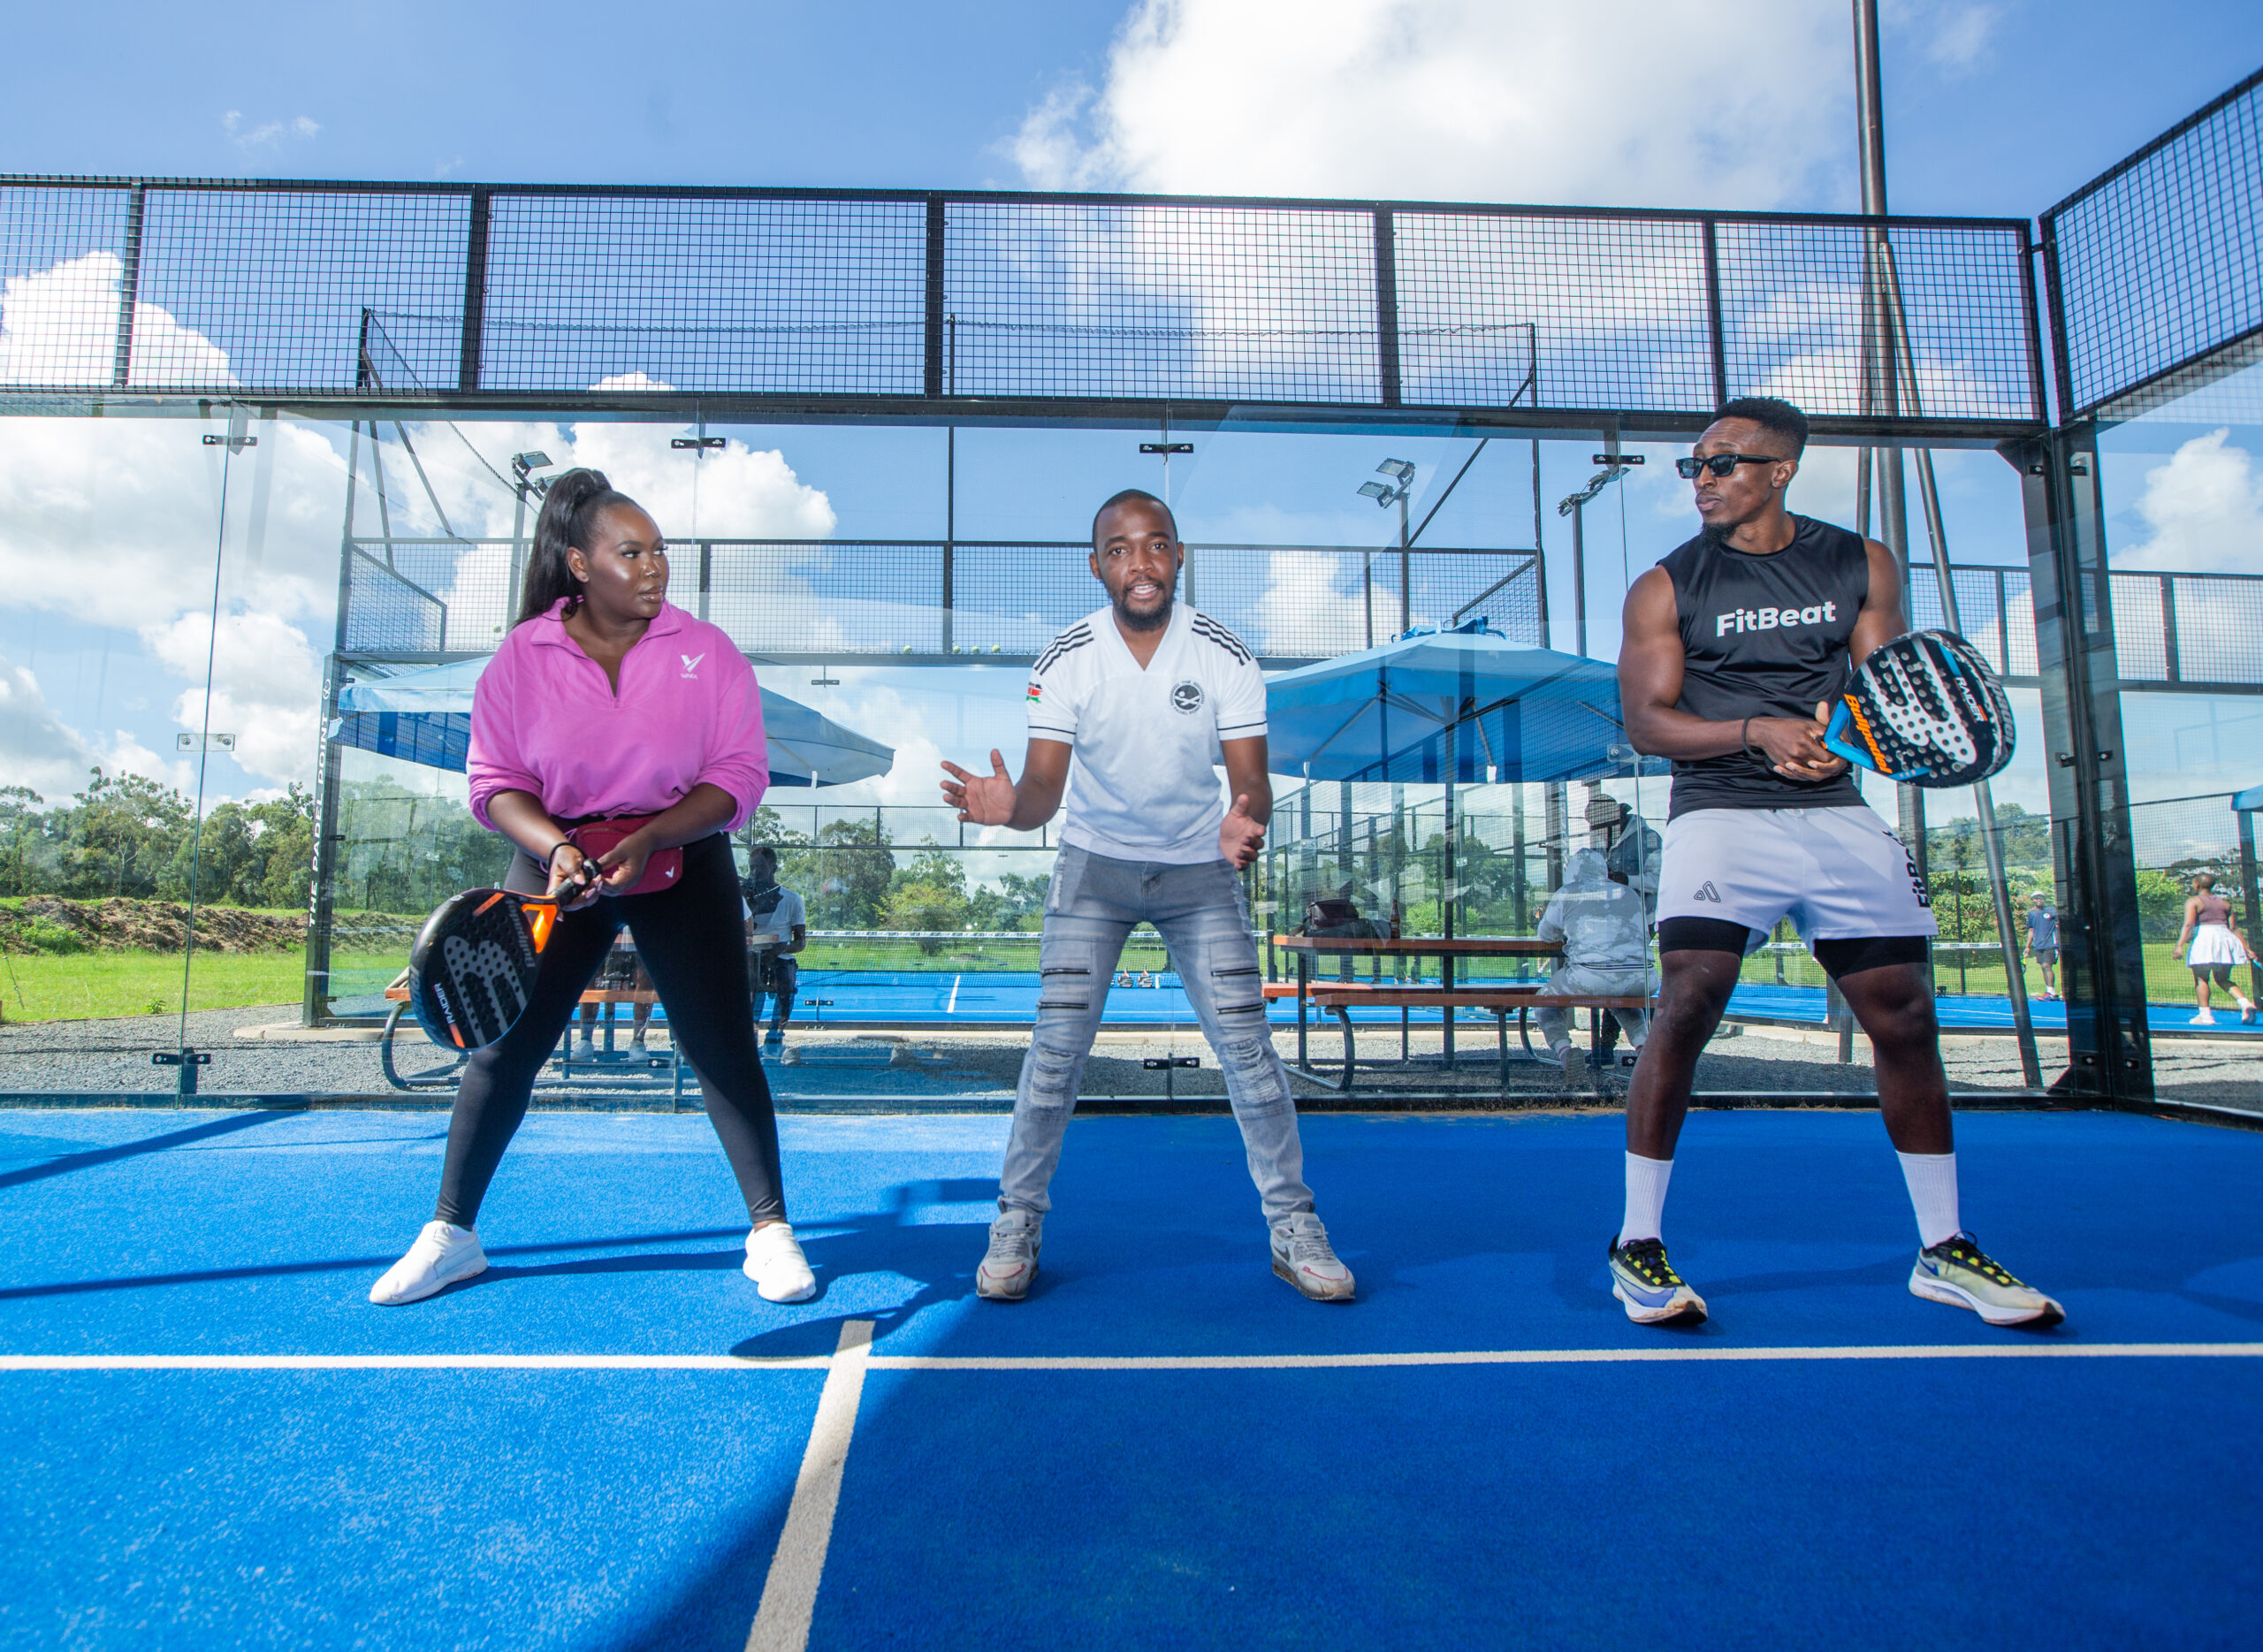 Aging with Grace: Bandari Beauty’s Padel Event Champions Self-Care and Wellness